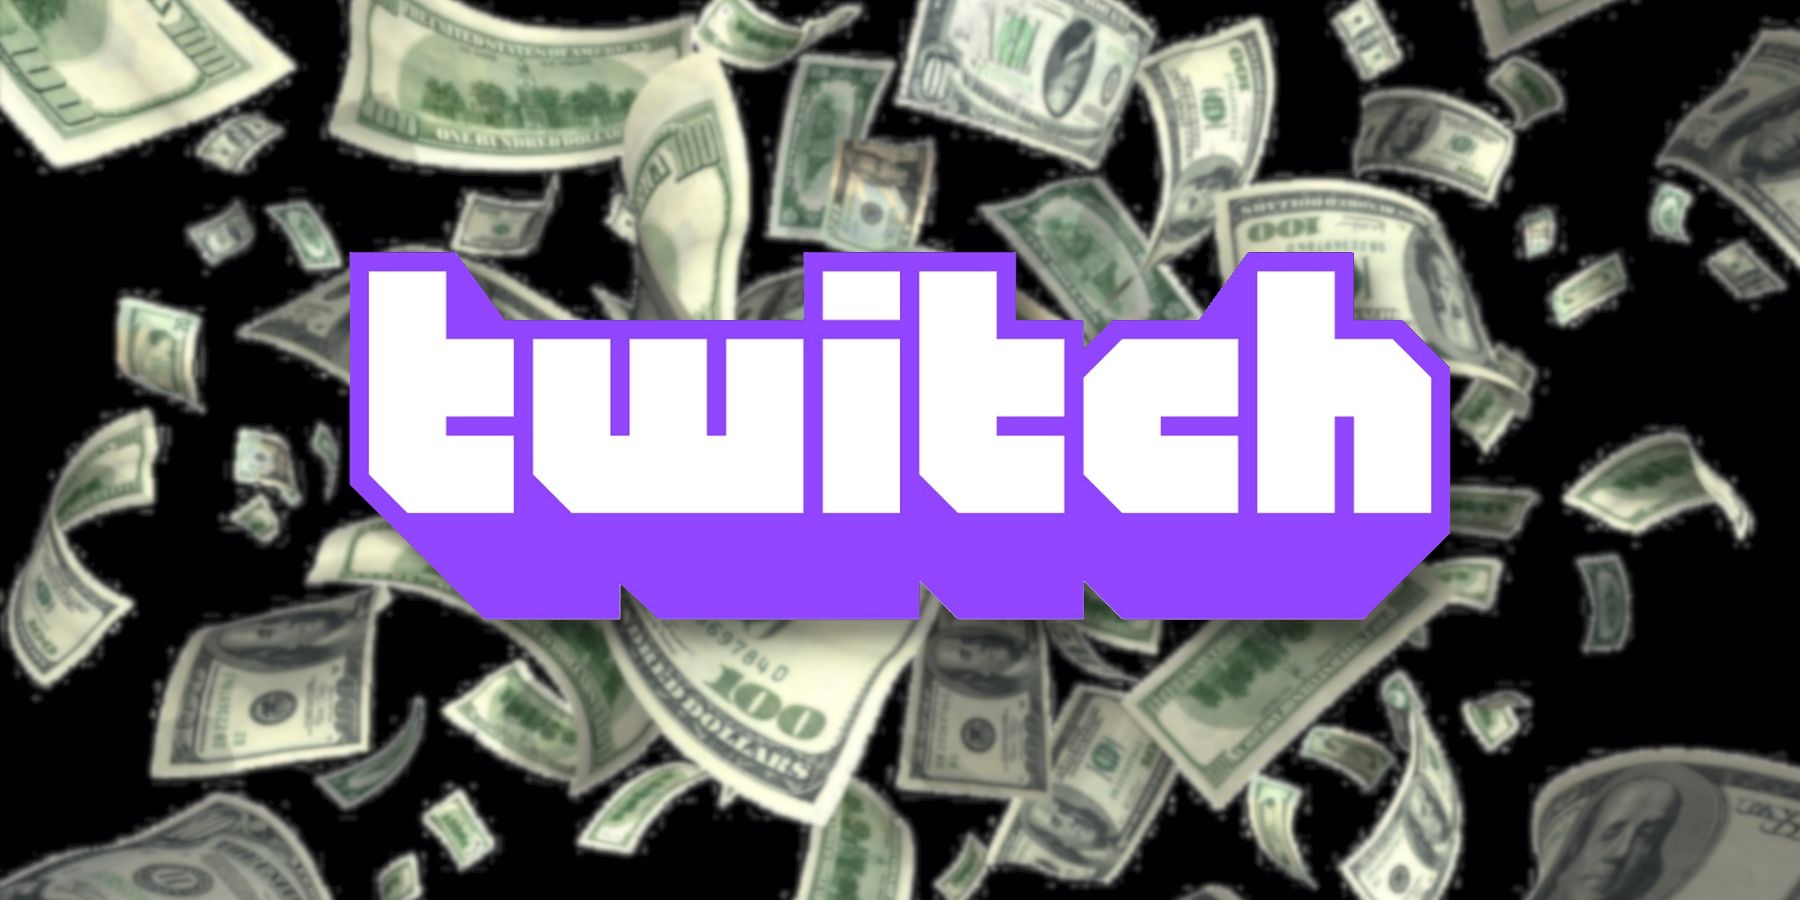 The Twitch logo with money falling behind it, all on a black background.